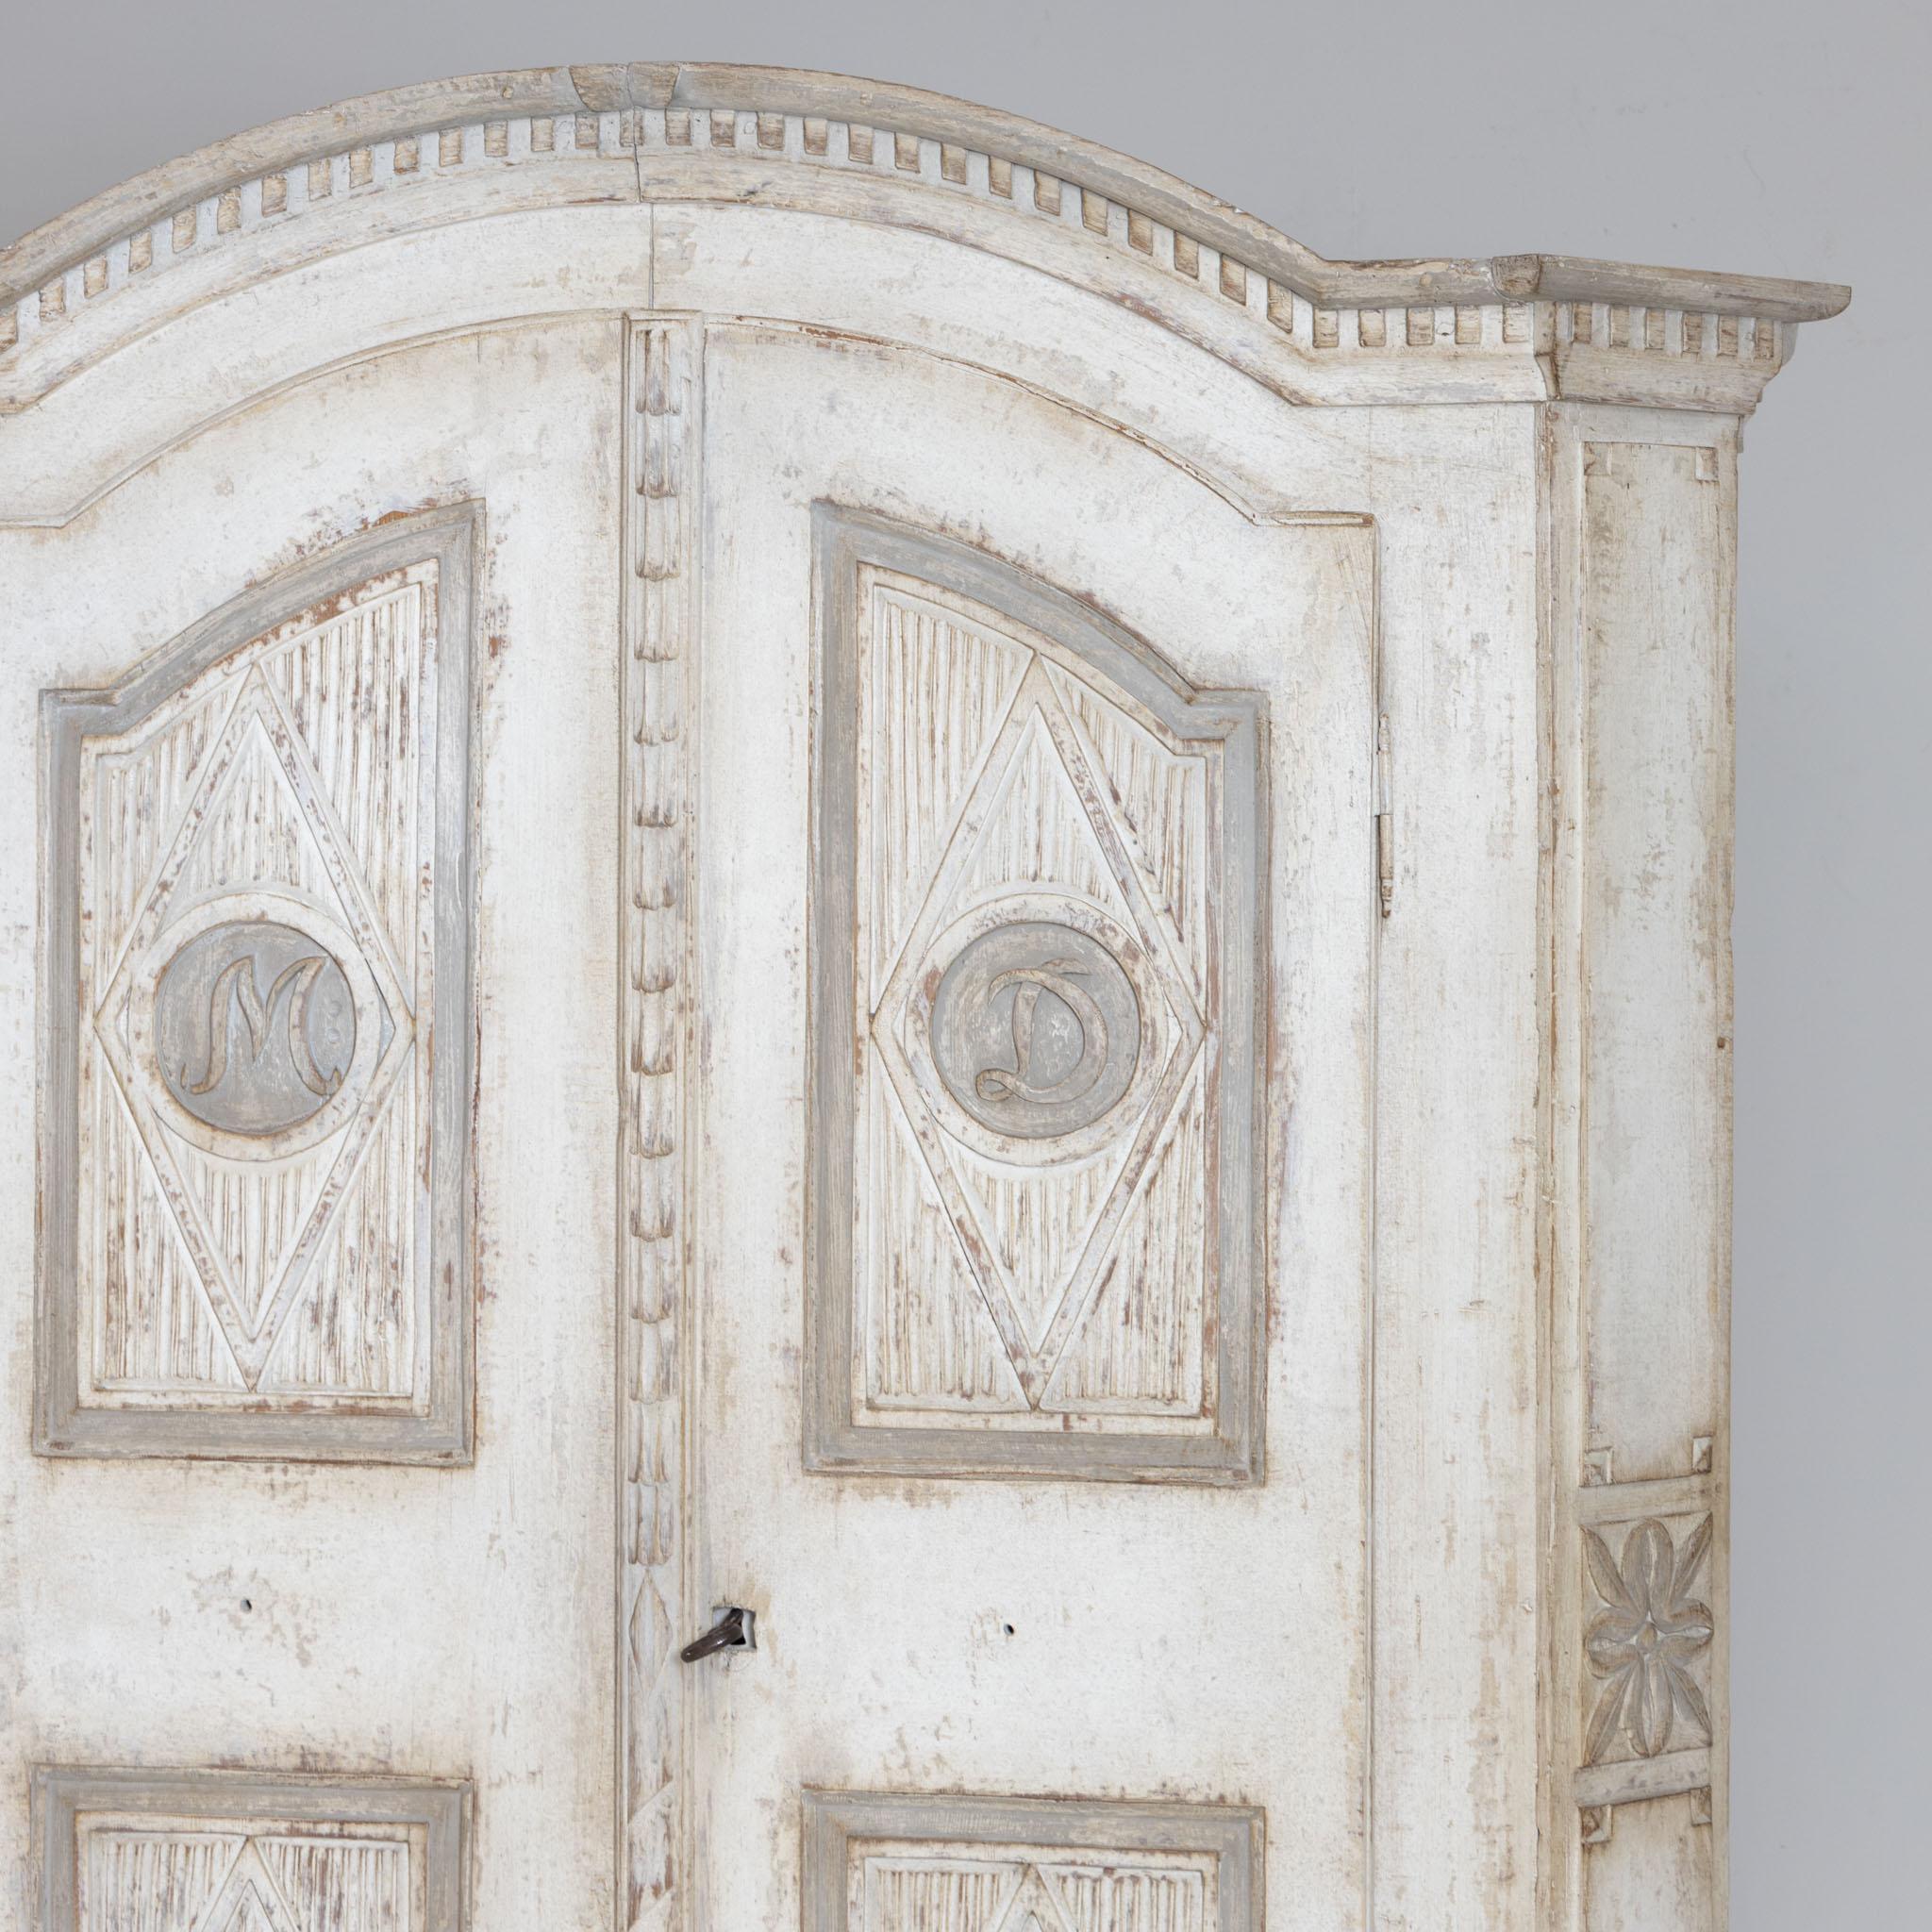 Carved Two-door Armoire or Wardrobe for Clothes, white paint with patina, 19th Century